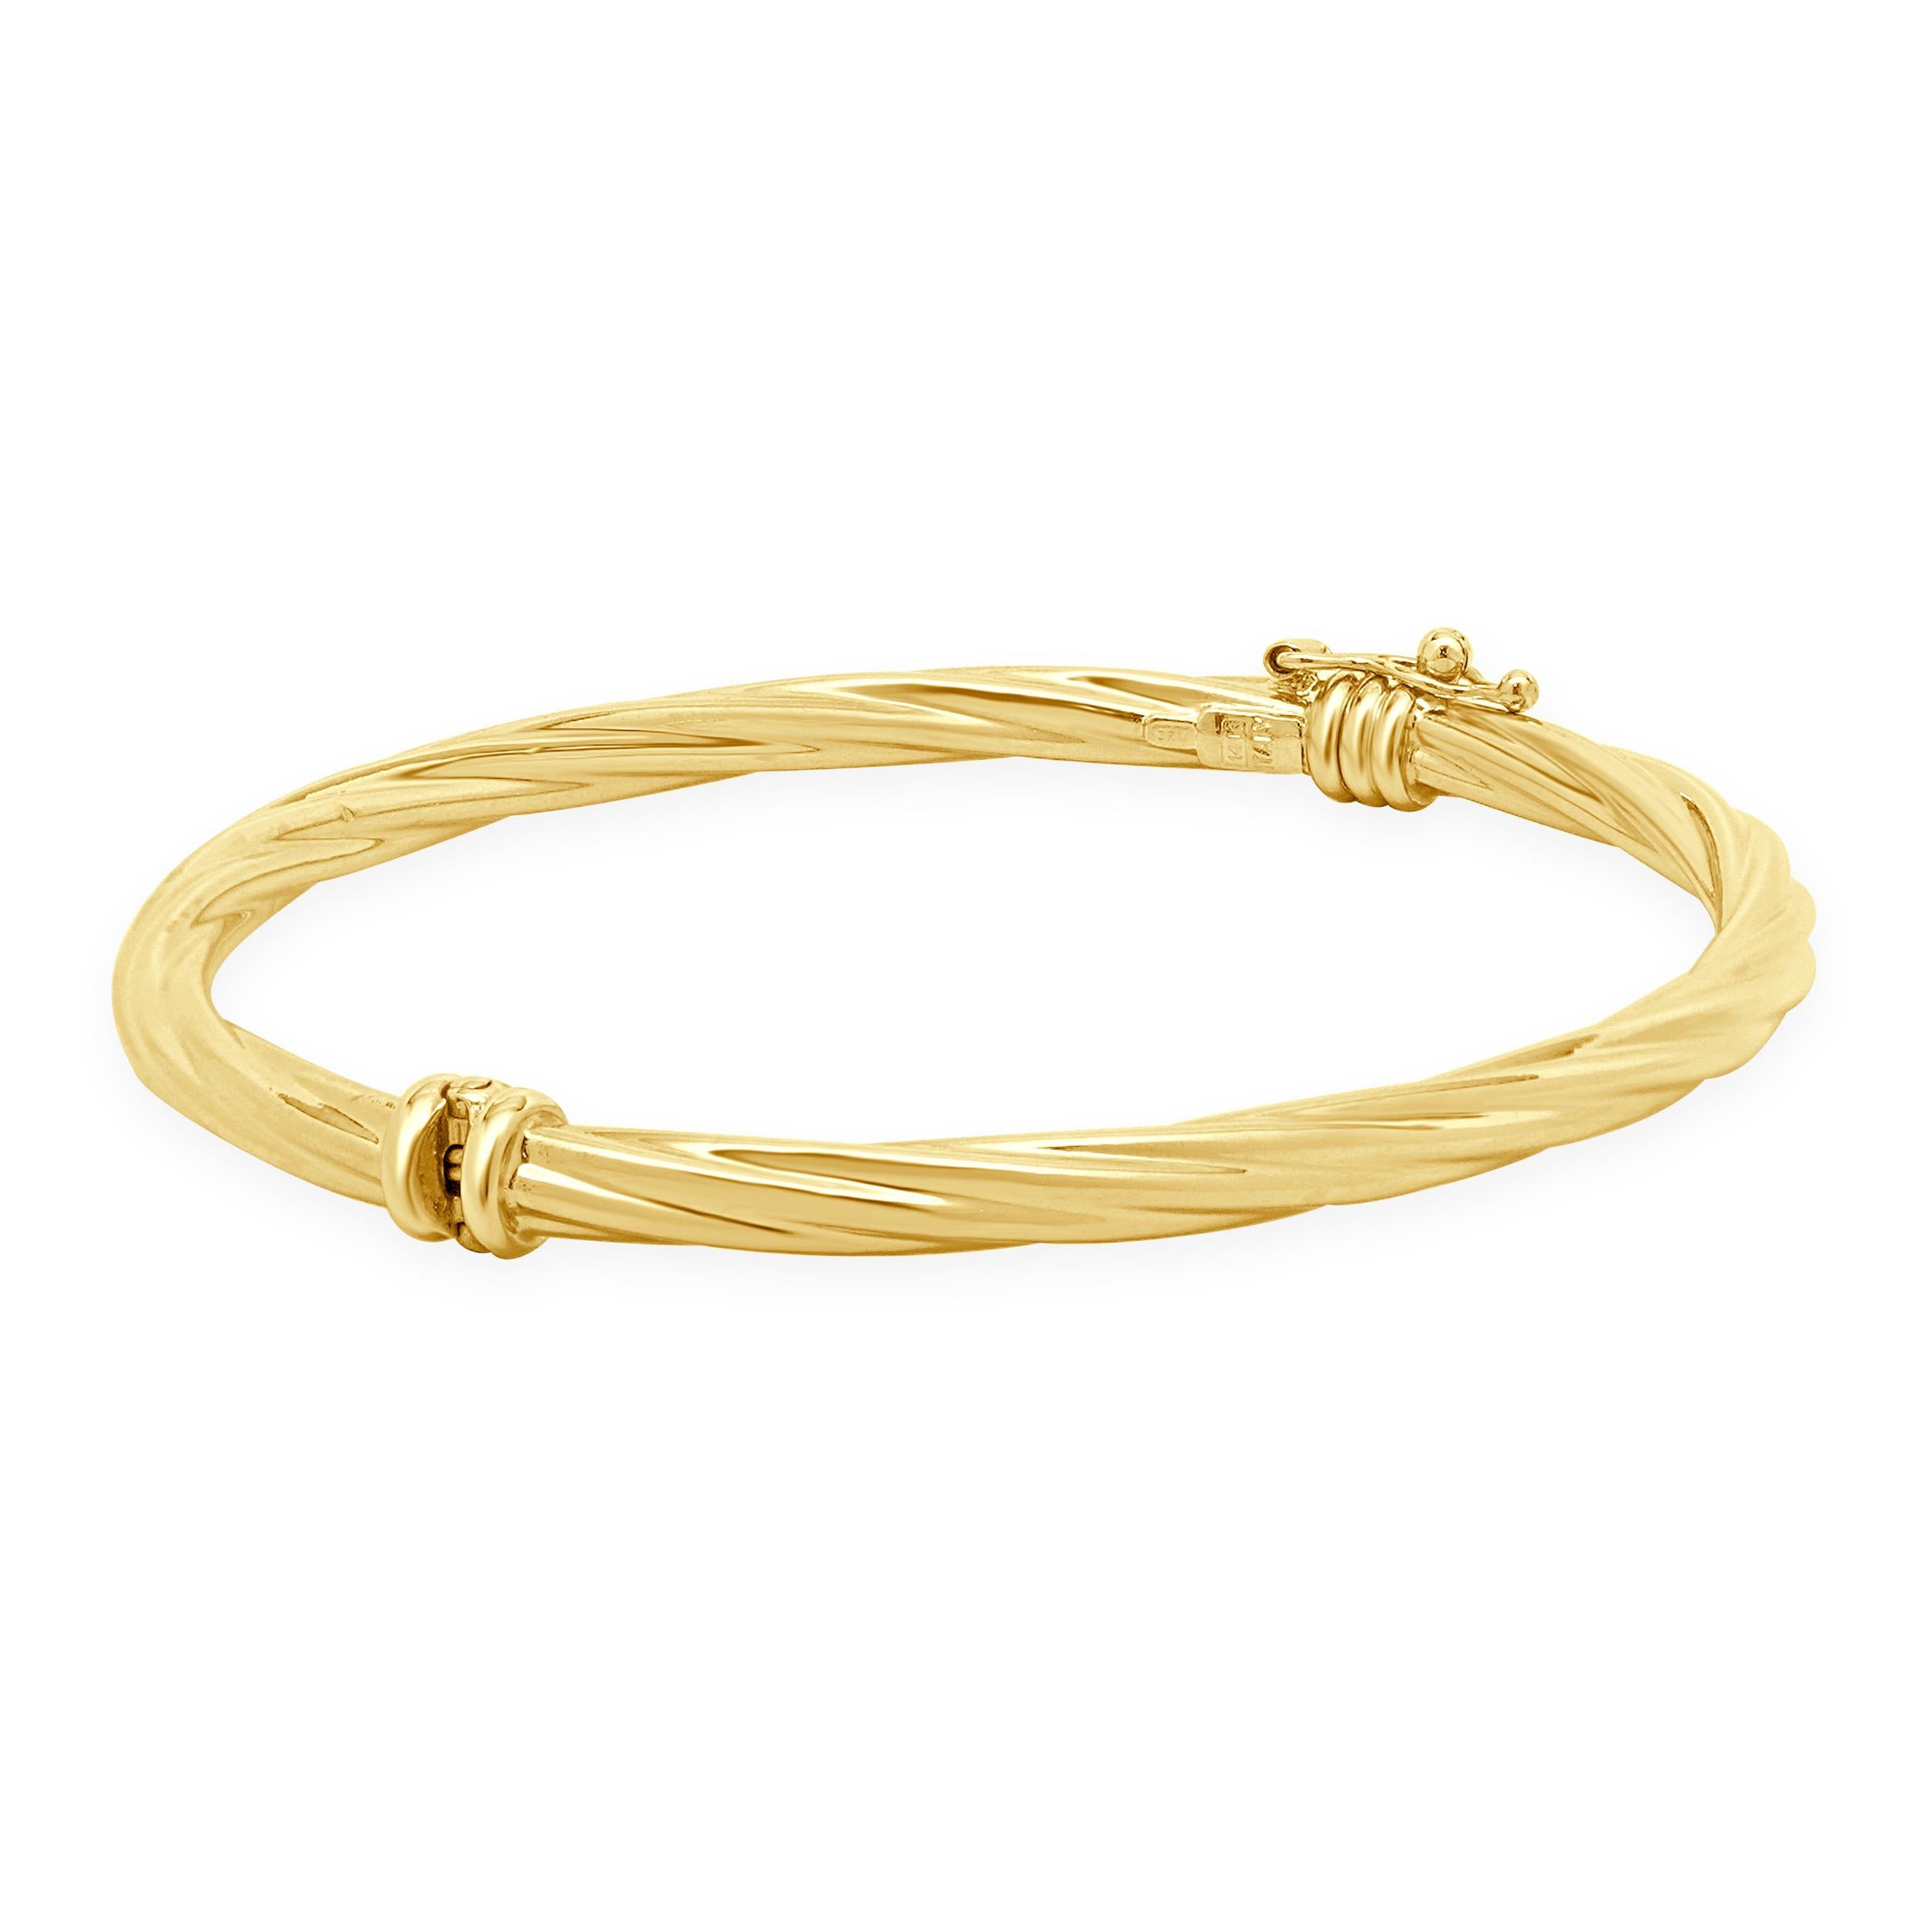 Material: 14K yellow gold
Dimensions: bracelet will fit up to a 7-inch wrist
Weight: 5.47 grams
